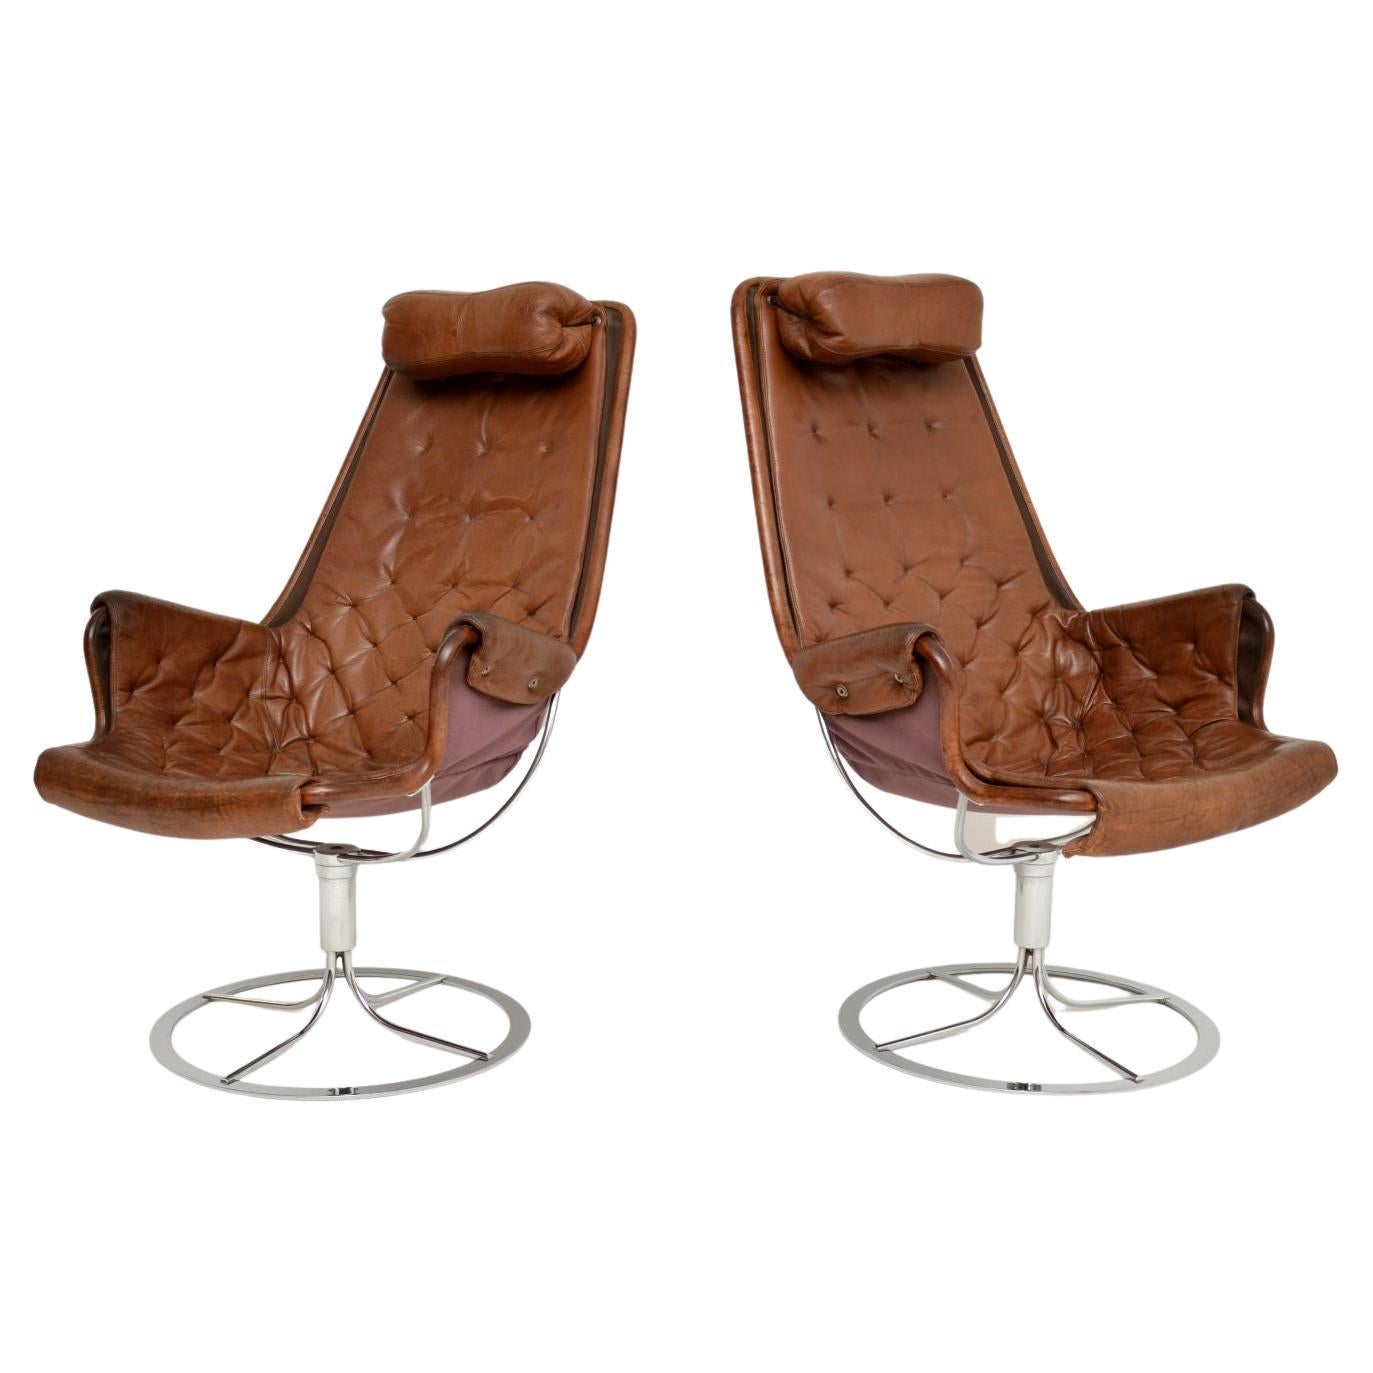 Pair of Vintage Leather Swivel 'Jetson' Armchairs by Bruno Mathsson